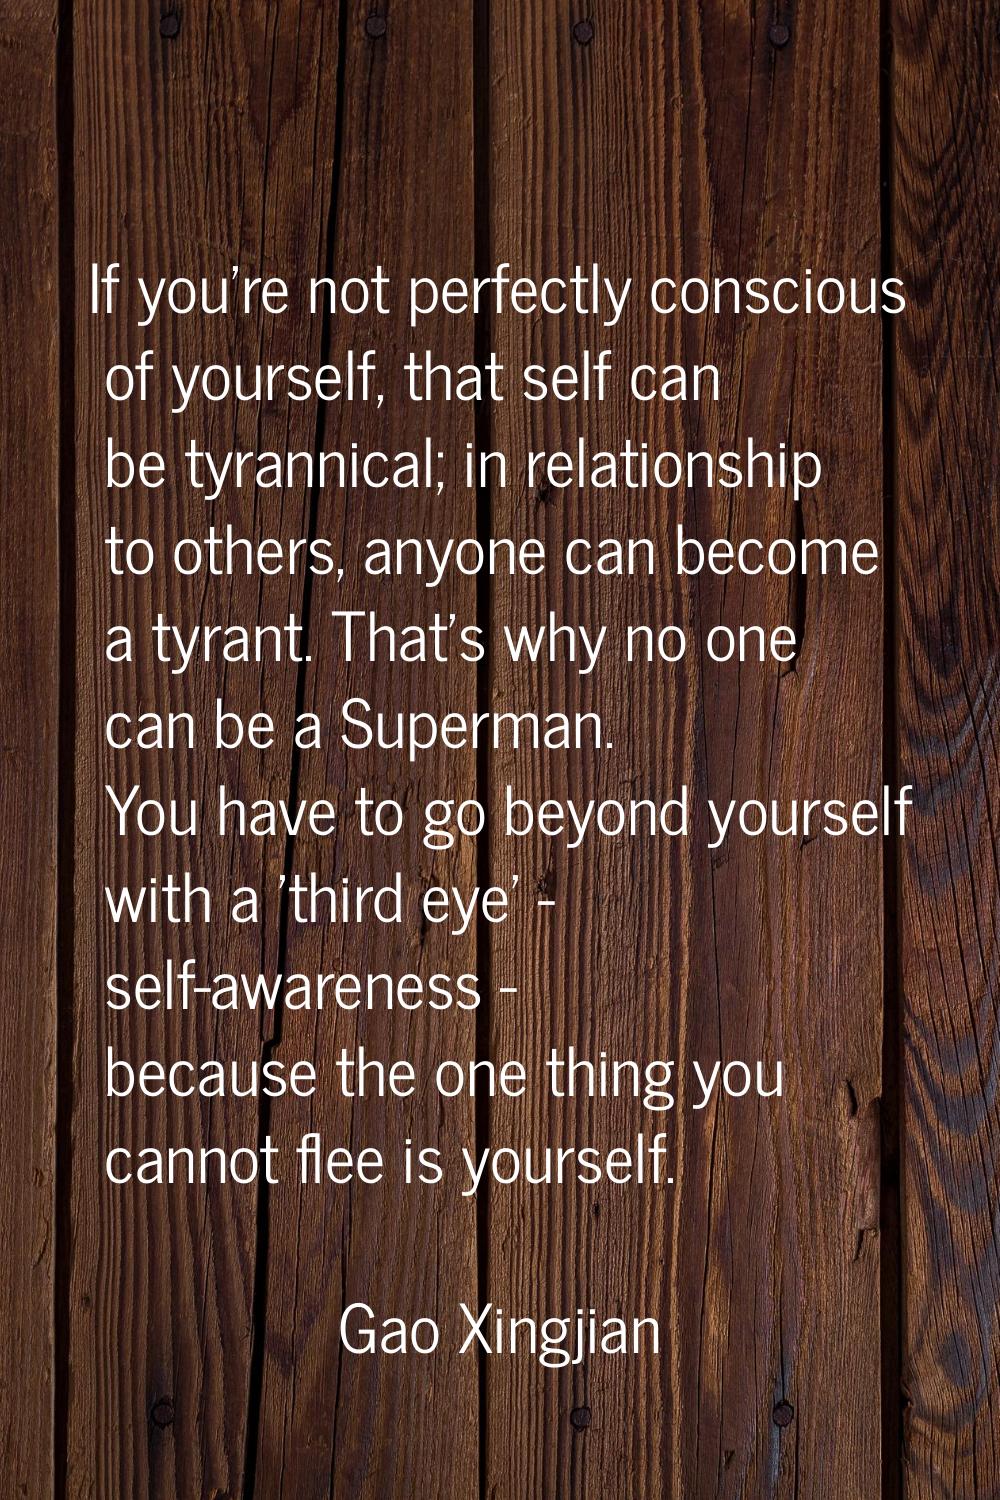 If you're not perfectly conscious of yourself, that self can be tyrannical; in relationship to othe